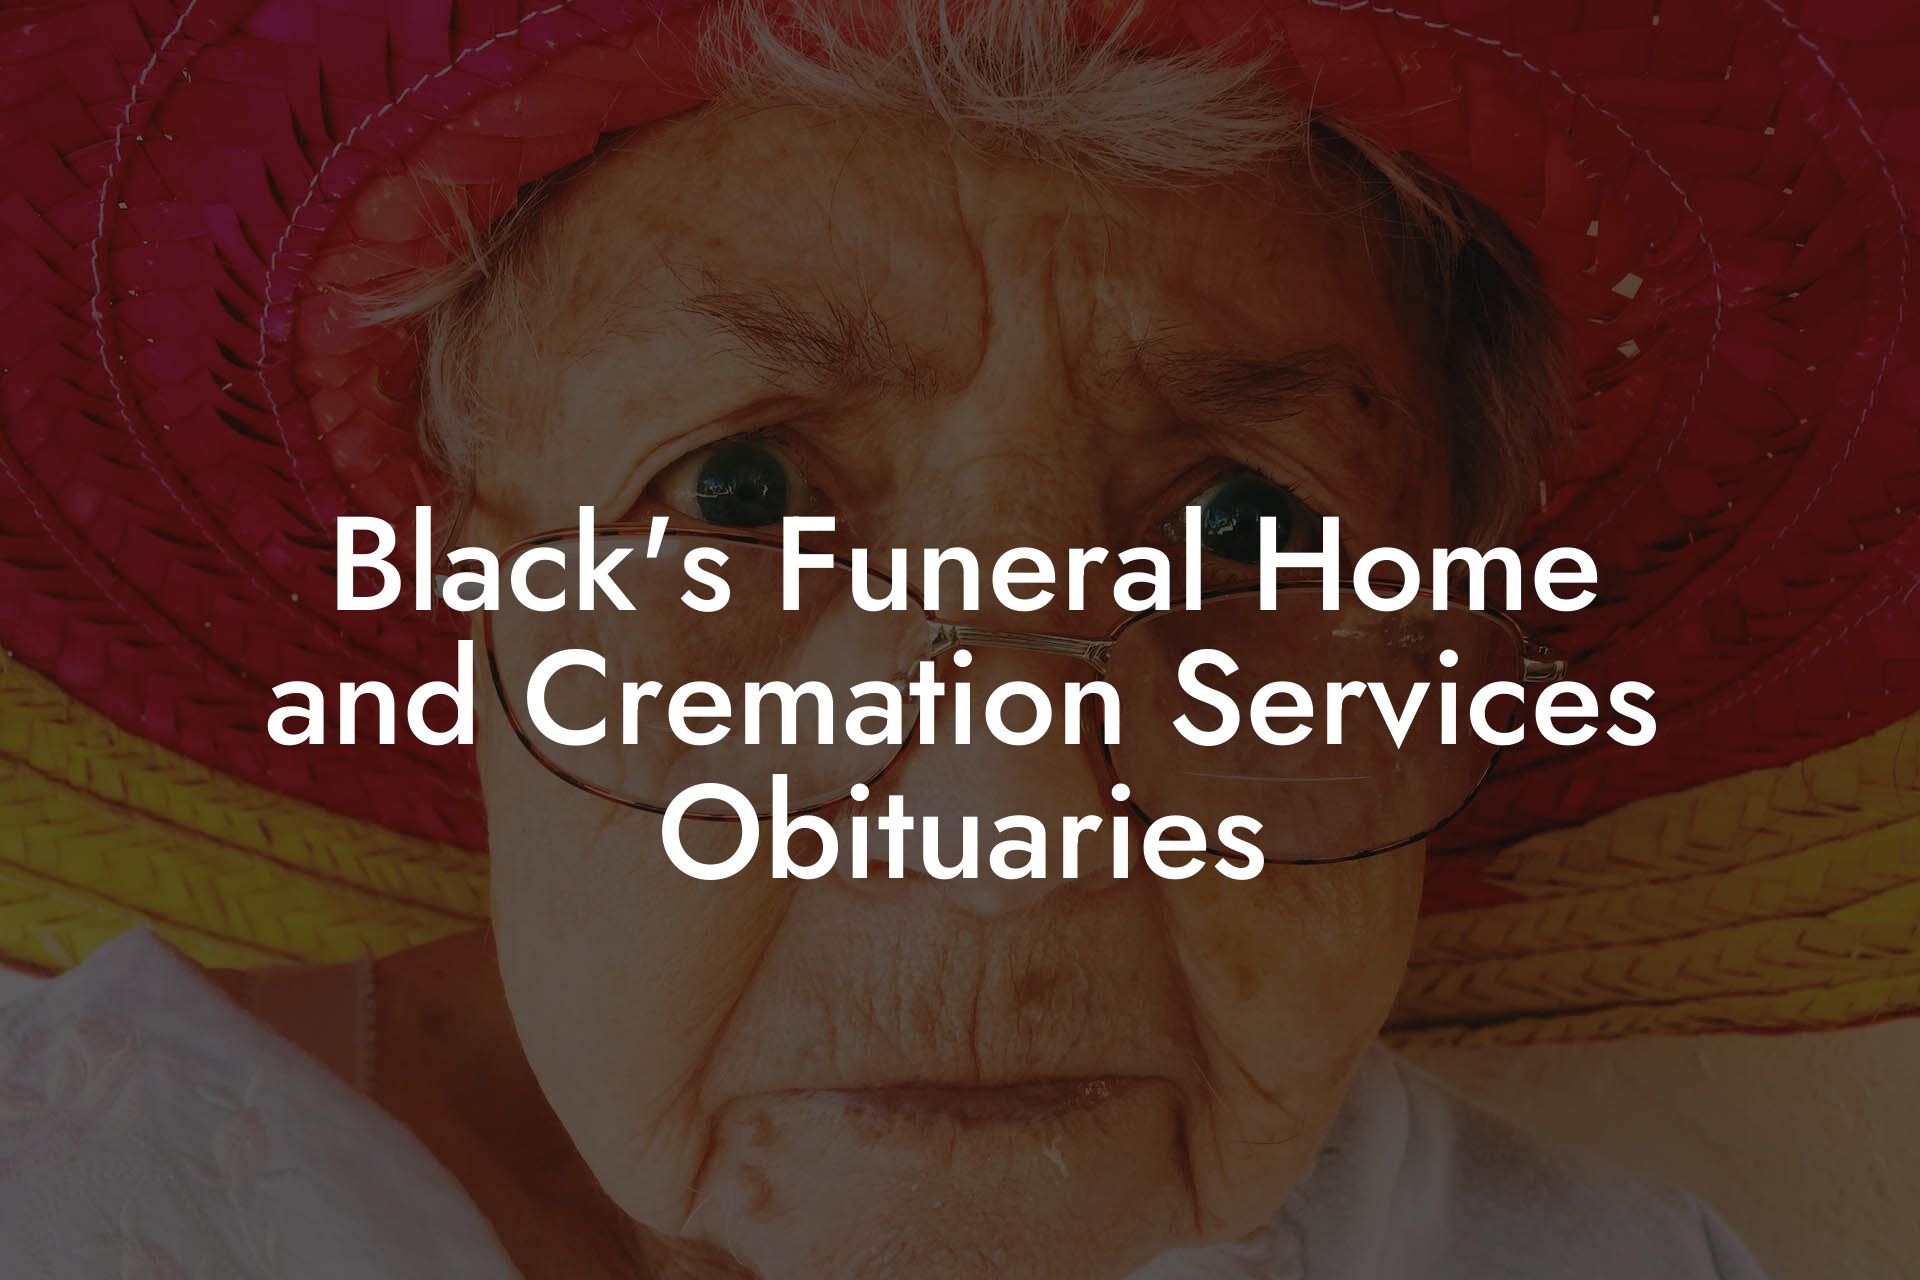 Black’s Funeral Home and Cremation Services Obituaries